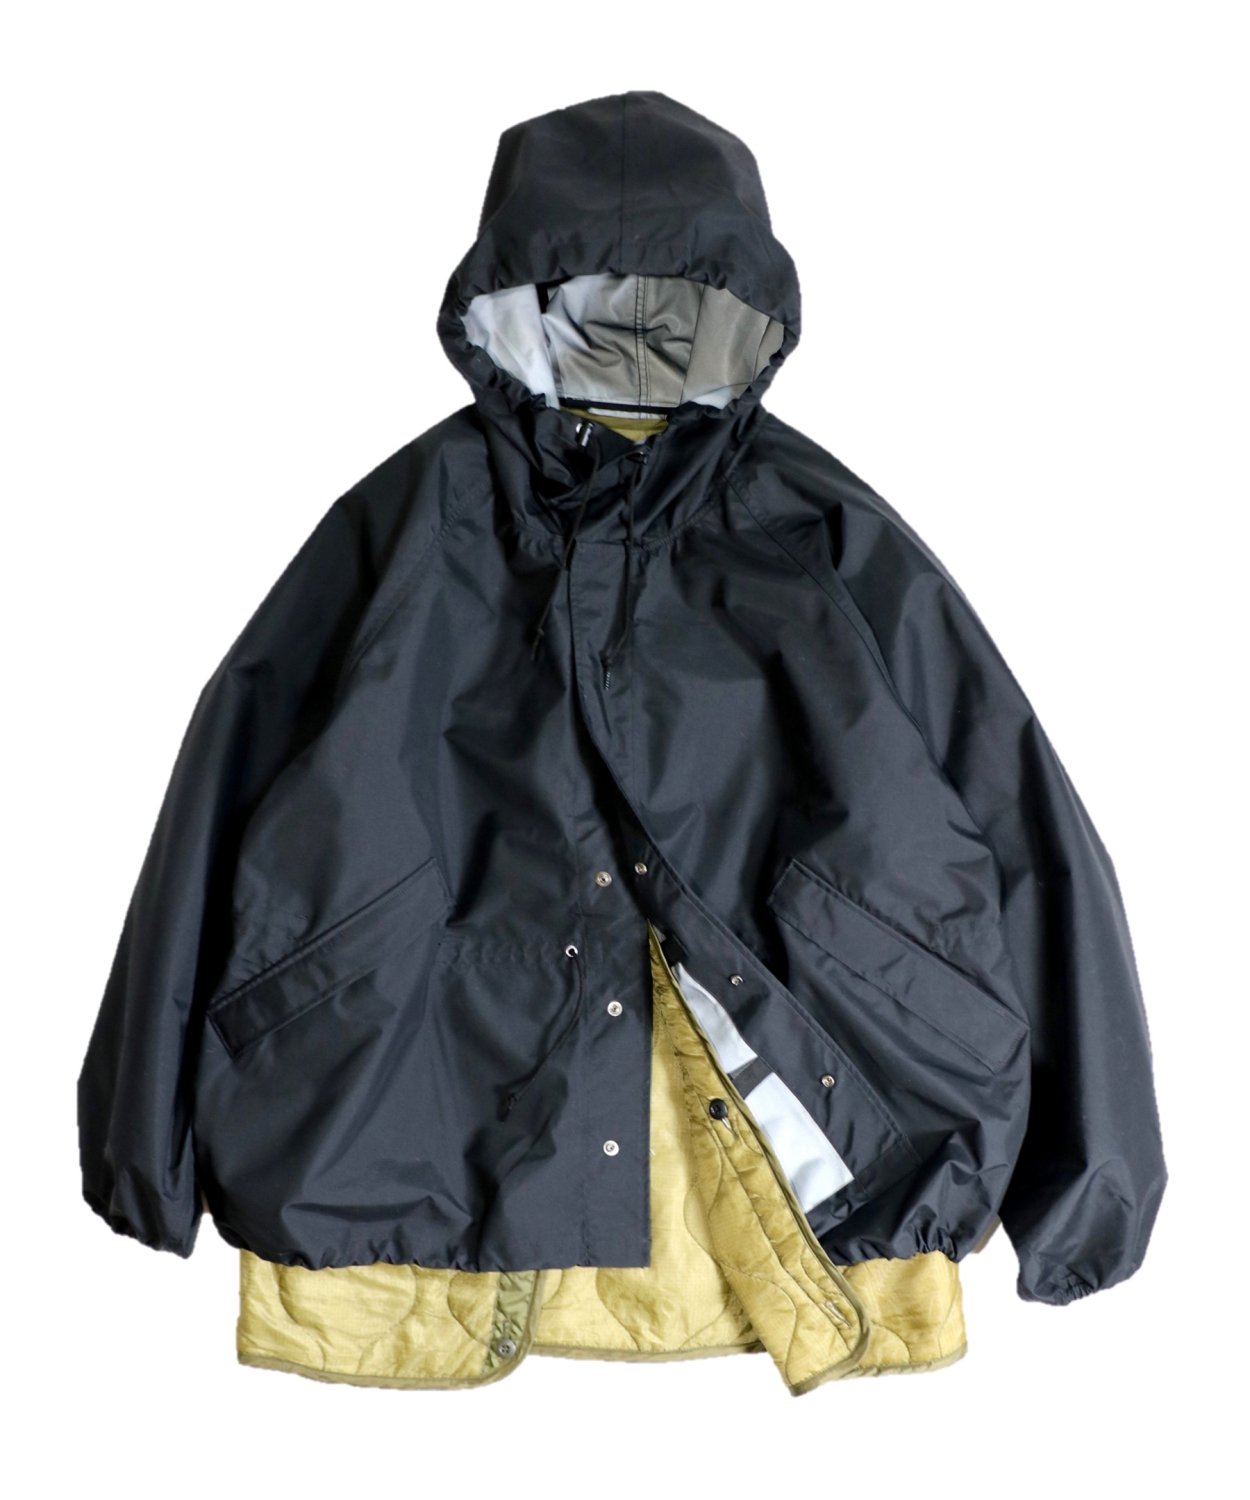 MADE IN STANDARD / ASHLAND 90S SHORT SNOW PARKA BREATHATEC WITH LINER